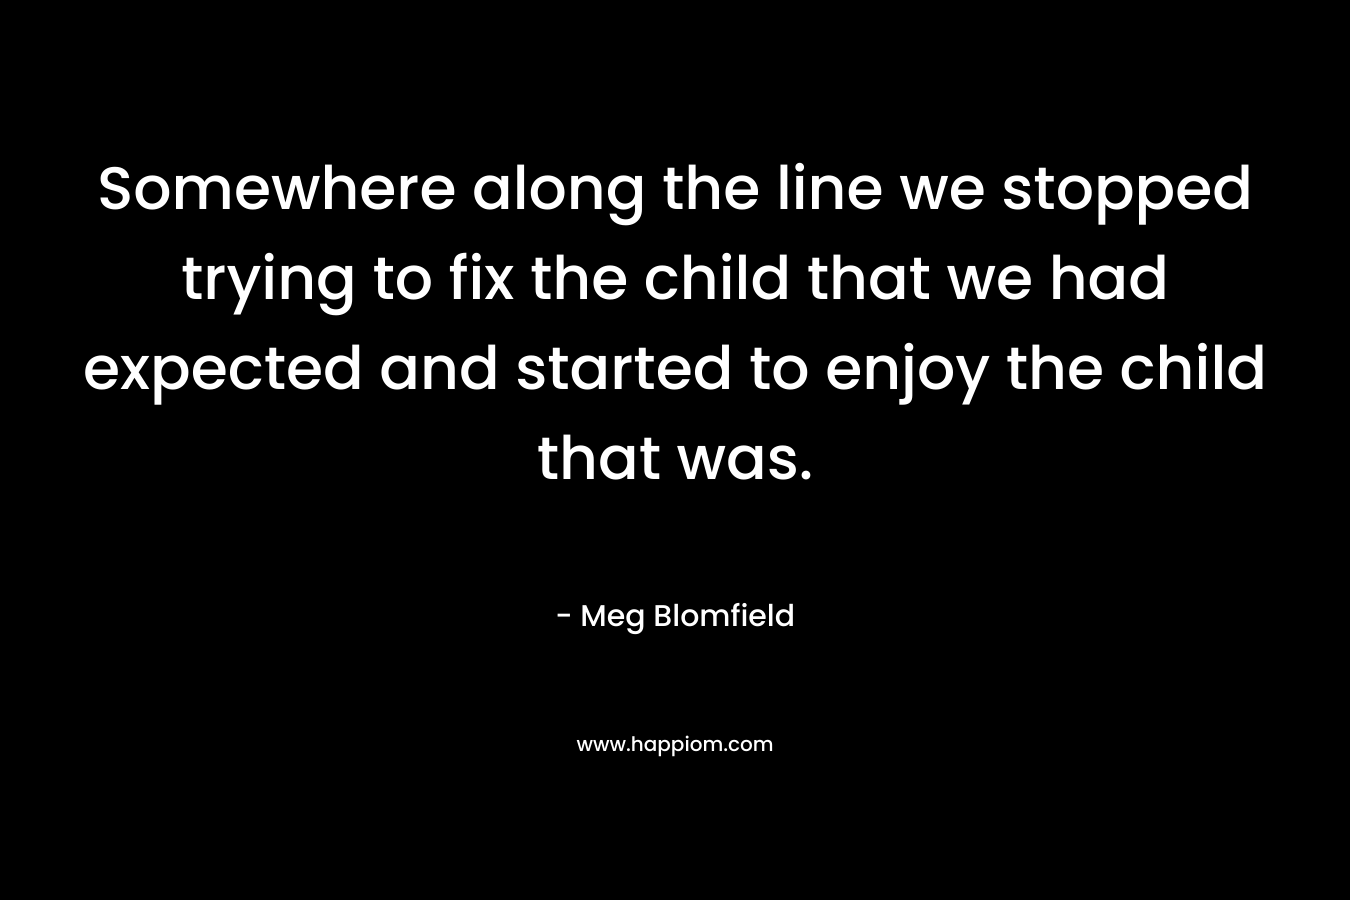 Somewhere along the line we stopped trying to fix the child that we had expected and started to enjoy the child that was.